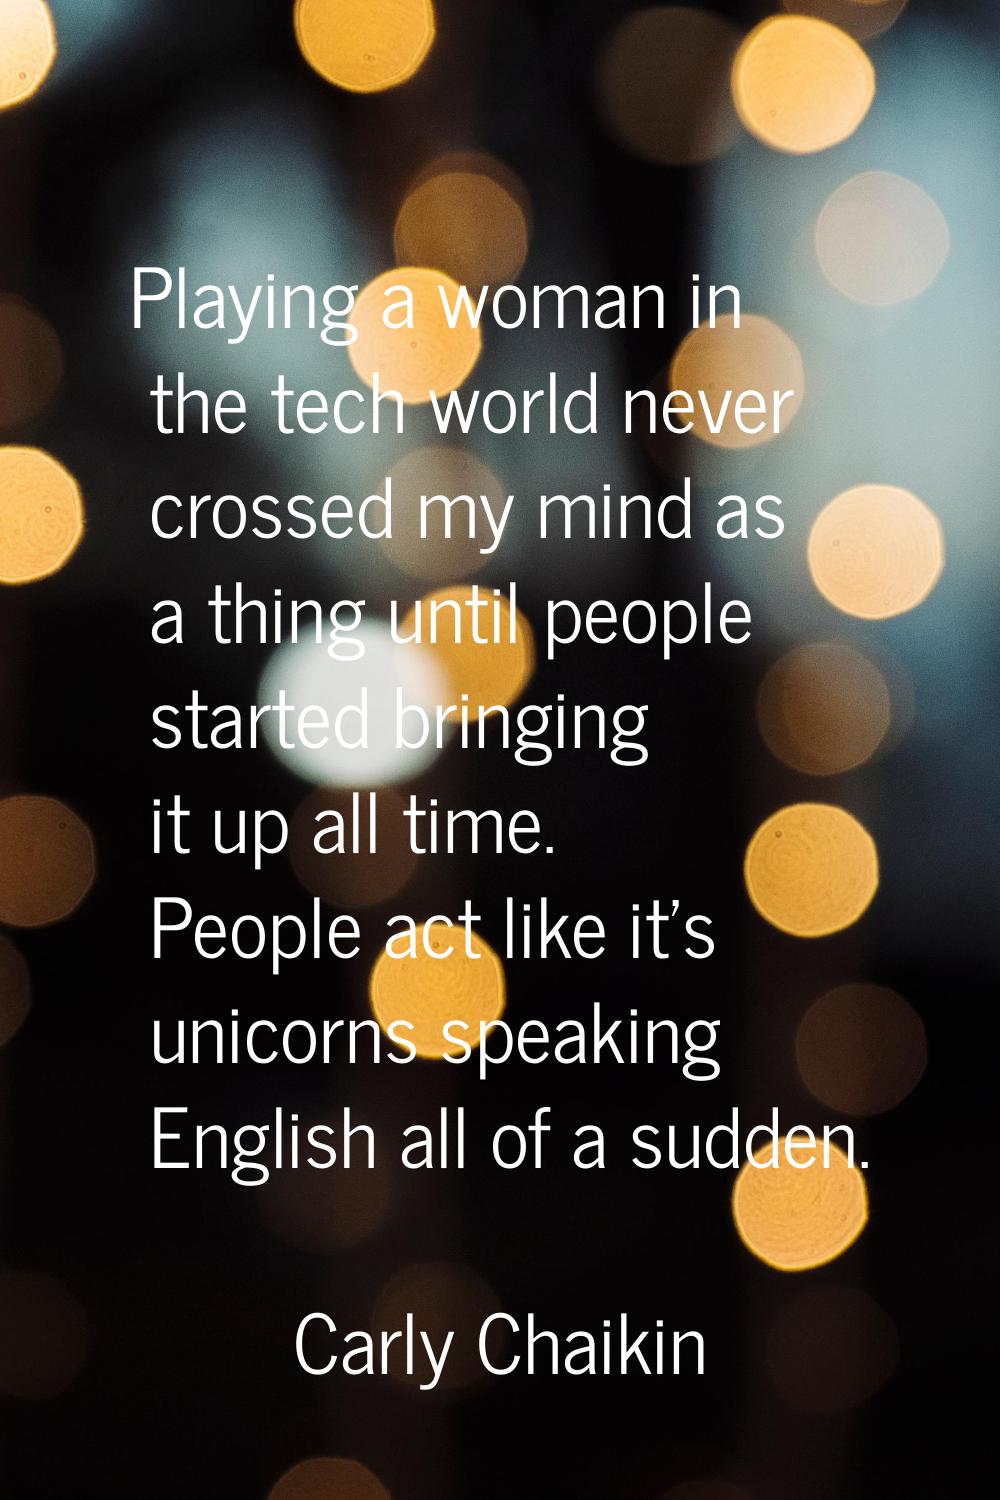 Playing a woman in the tech world never crossed my mind as a thing until people started bringing it